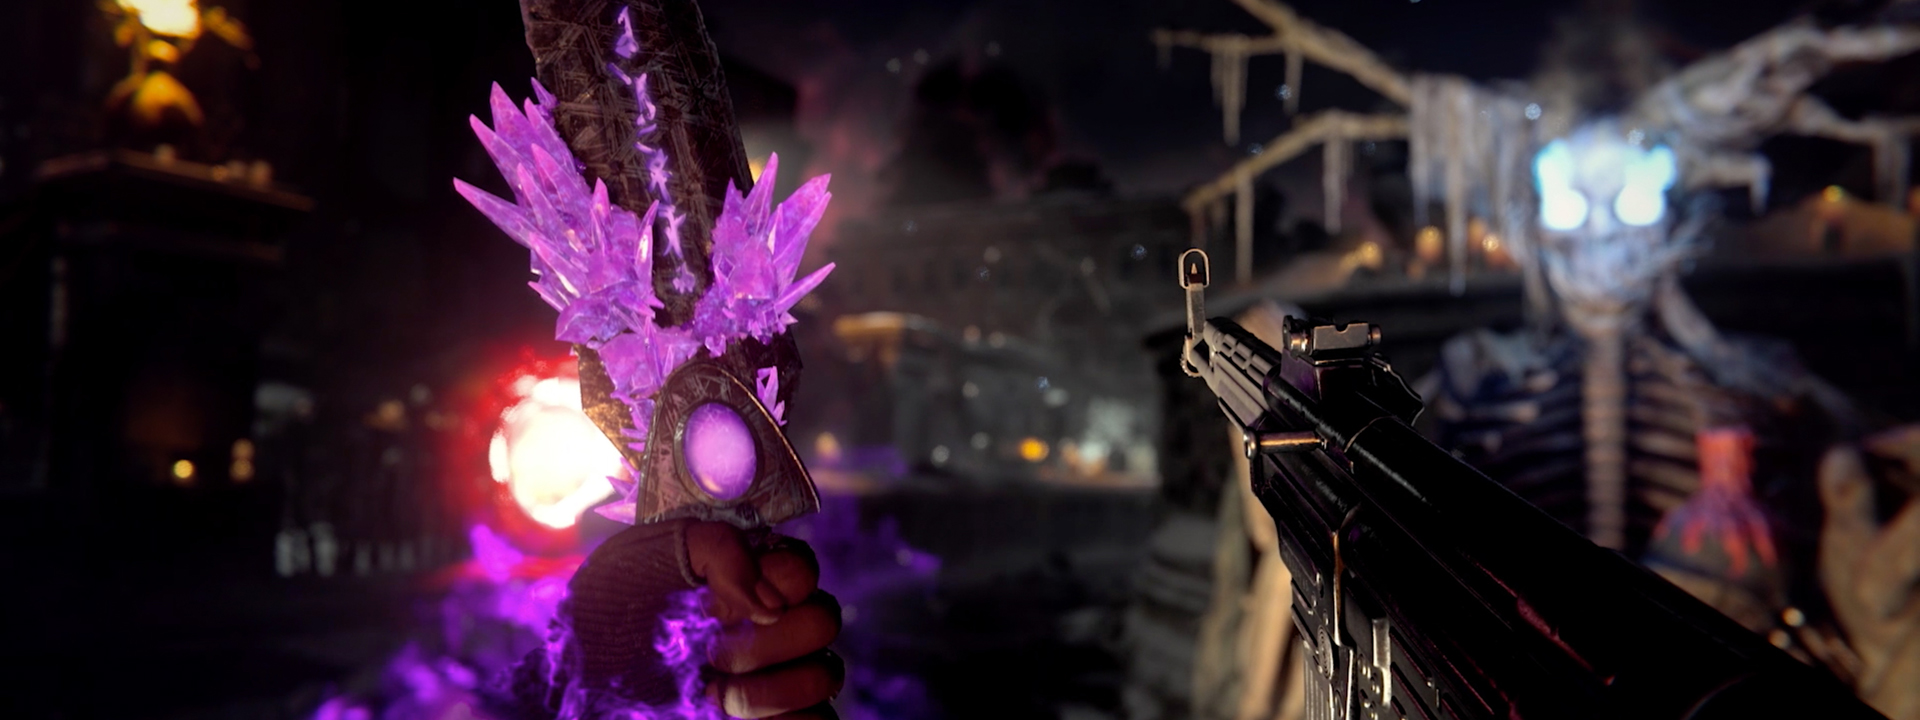 How To Use Perks In Call Of Duty: Vanguard Zombies - GameSpot